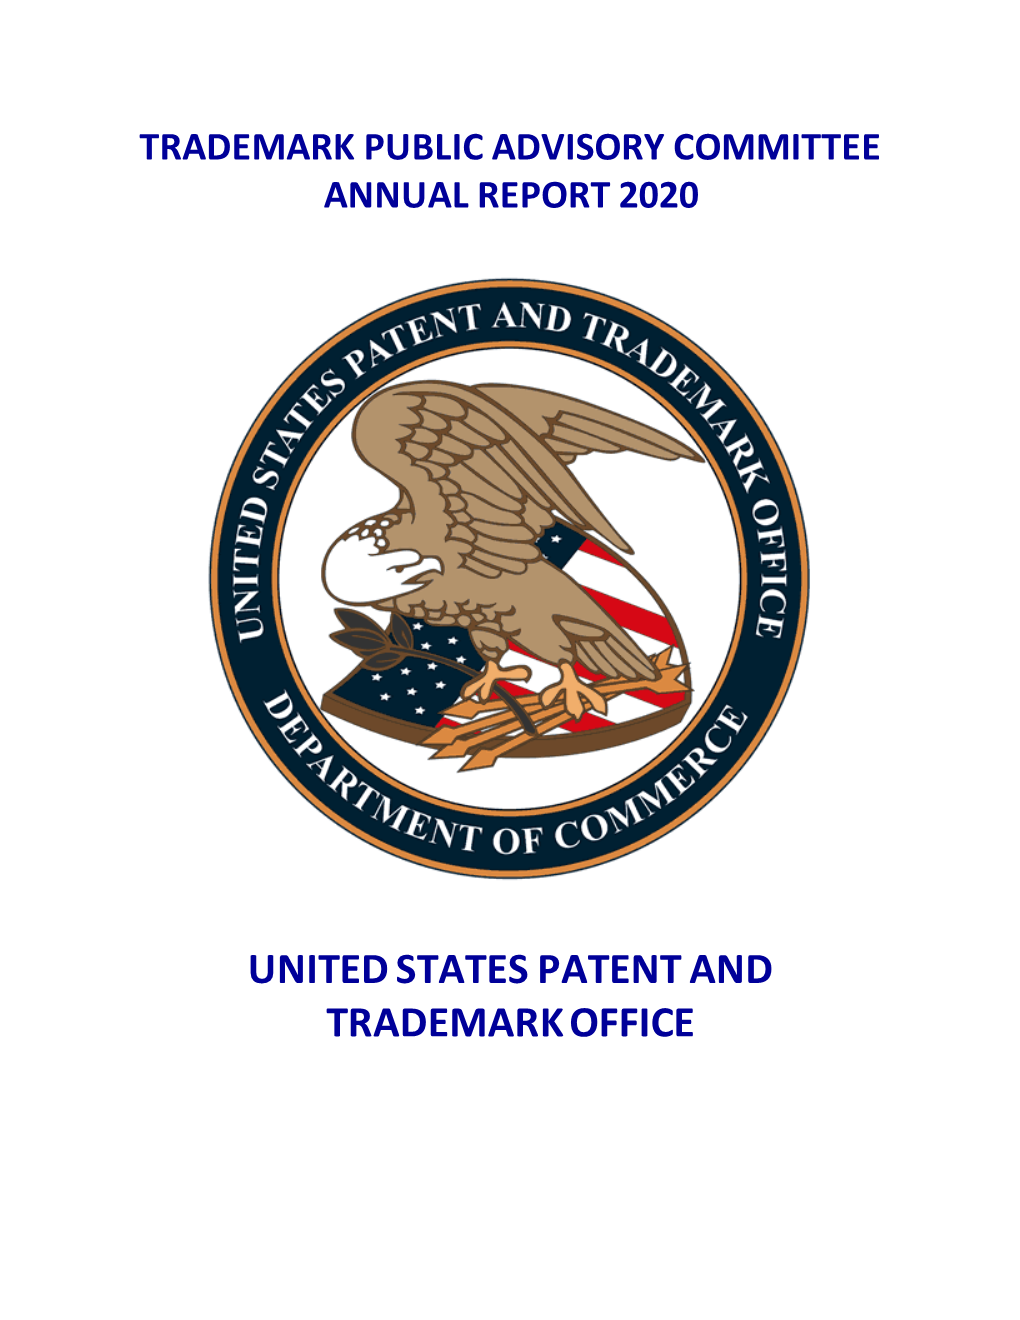 (TPAC) Annual Report